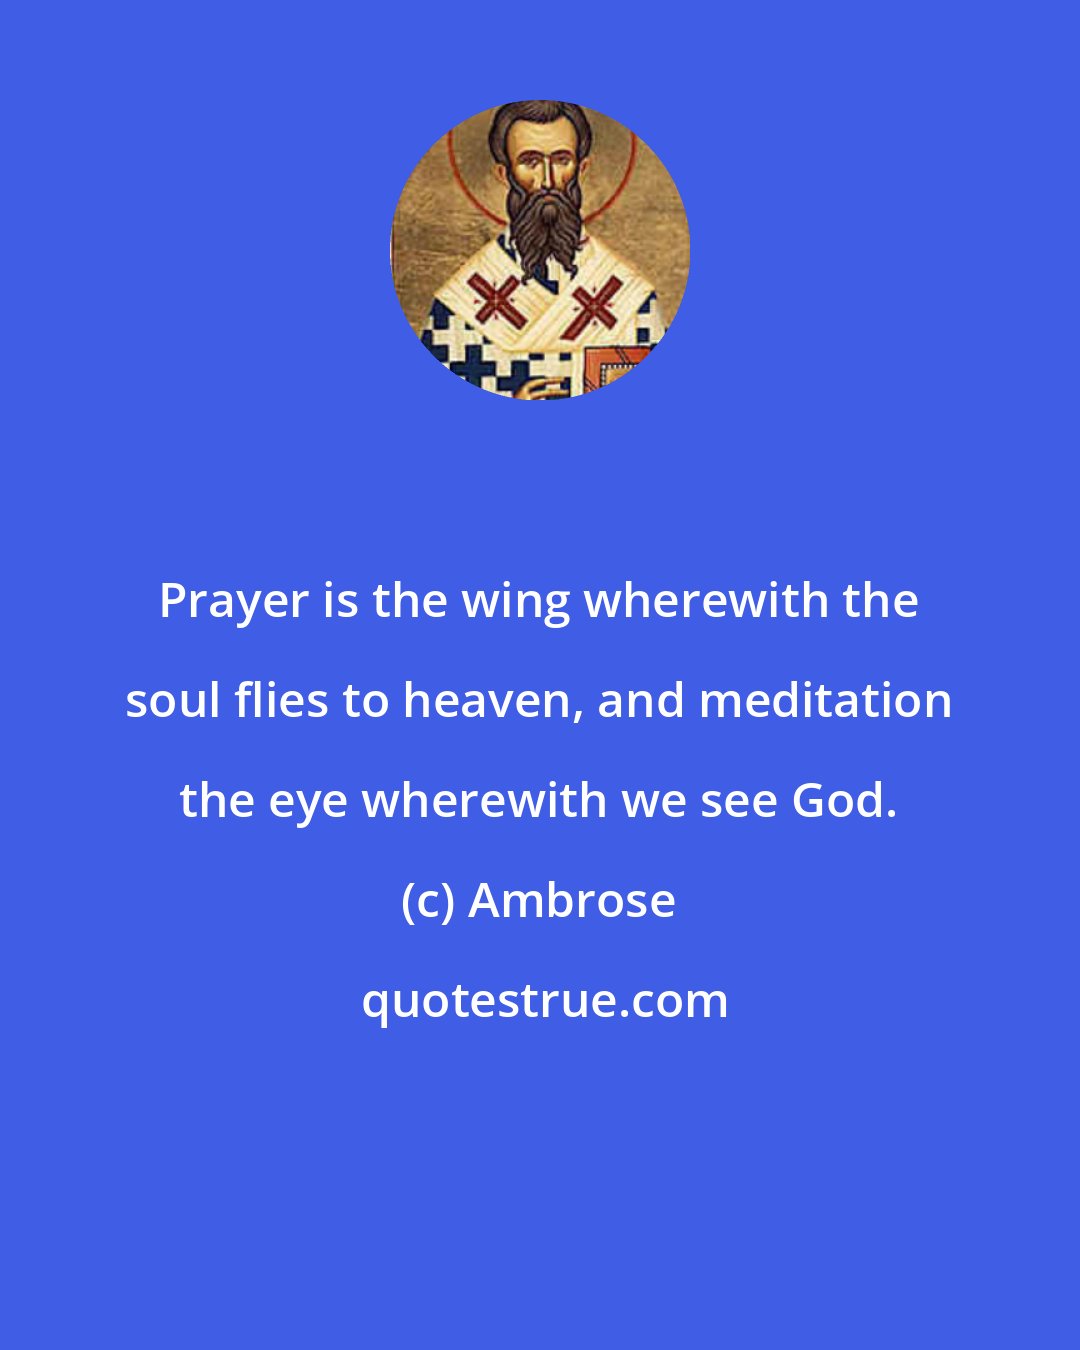 Ambrose: Prayer is the wing wherewith the soul flies to heaven, and meditation the eye wherewith we see God.